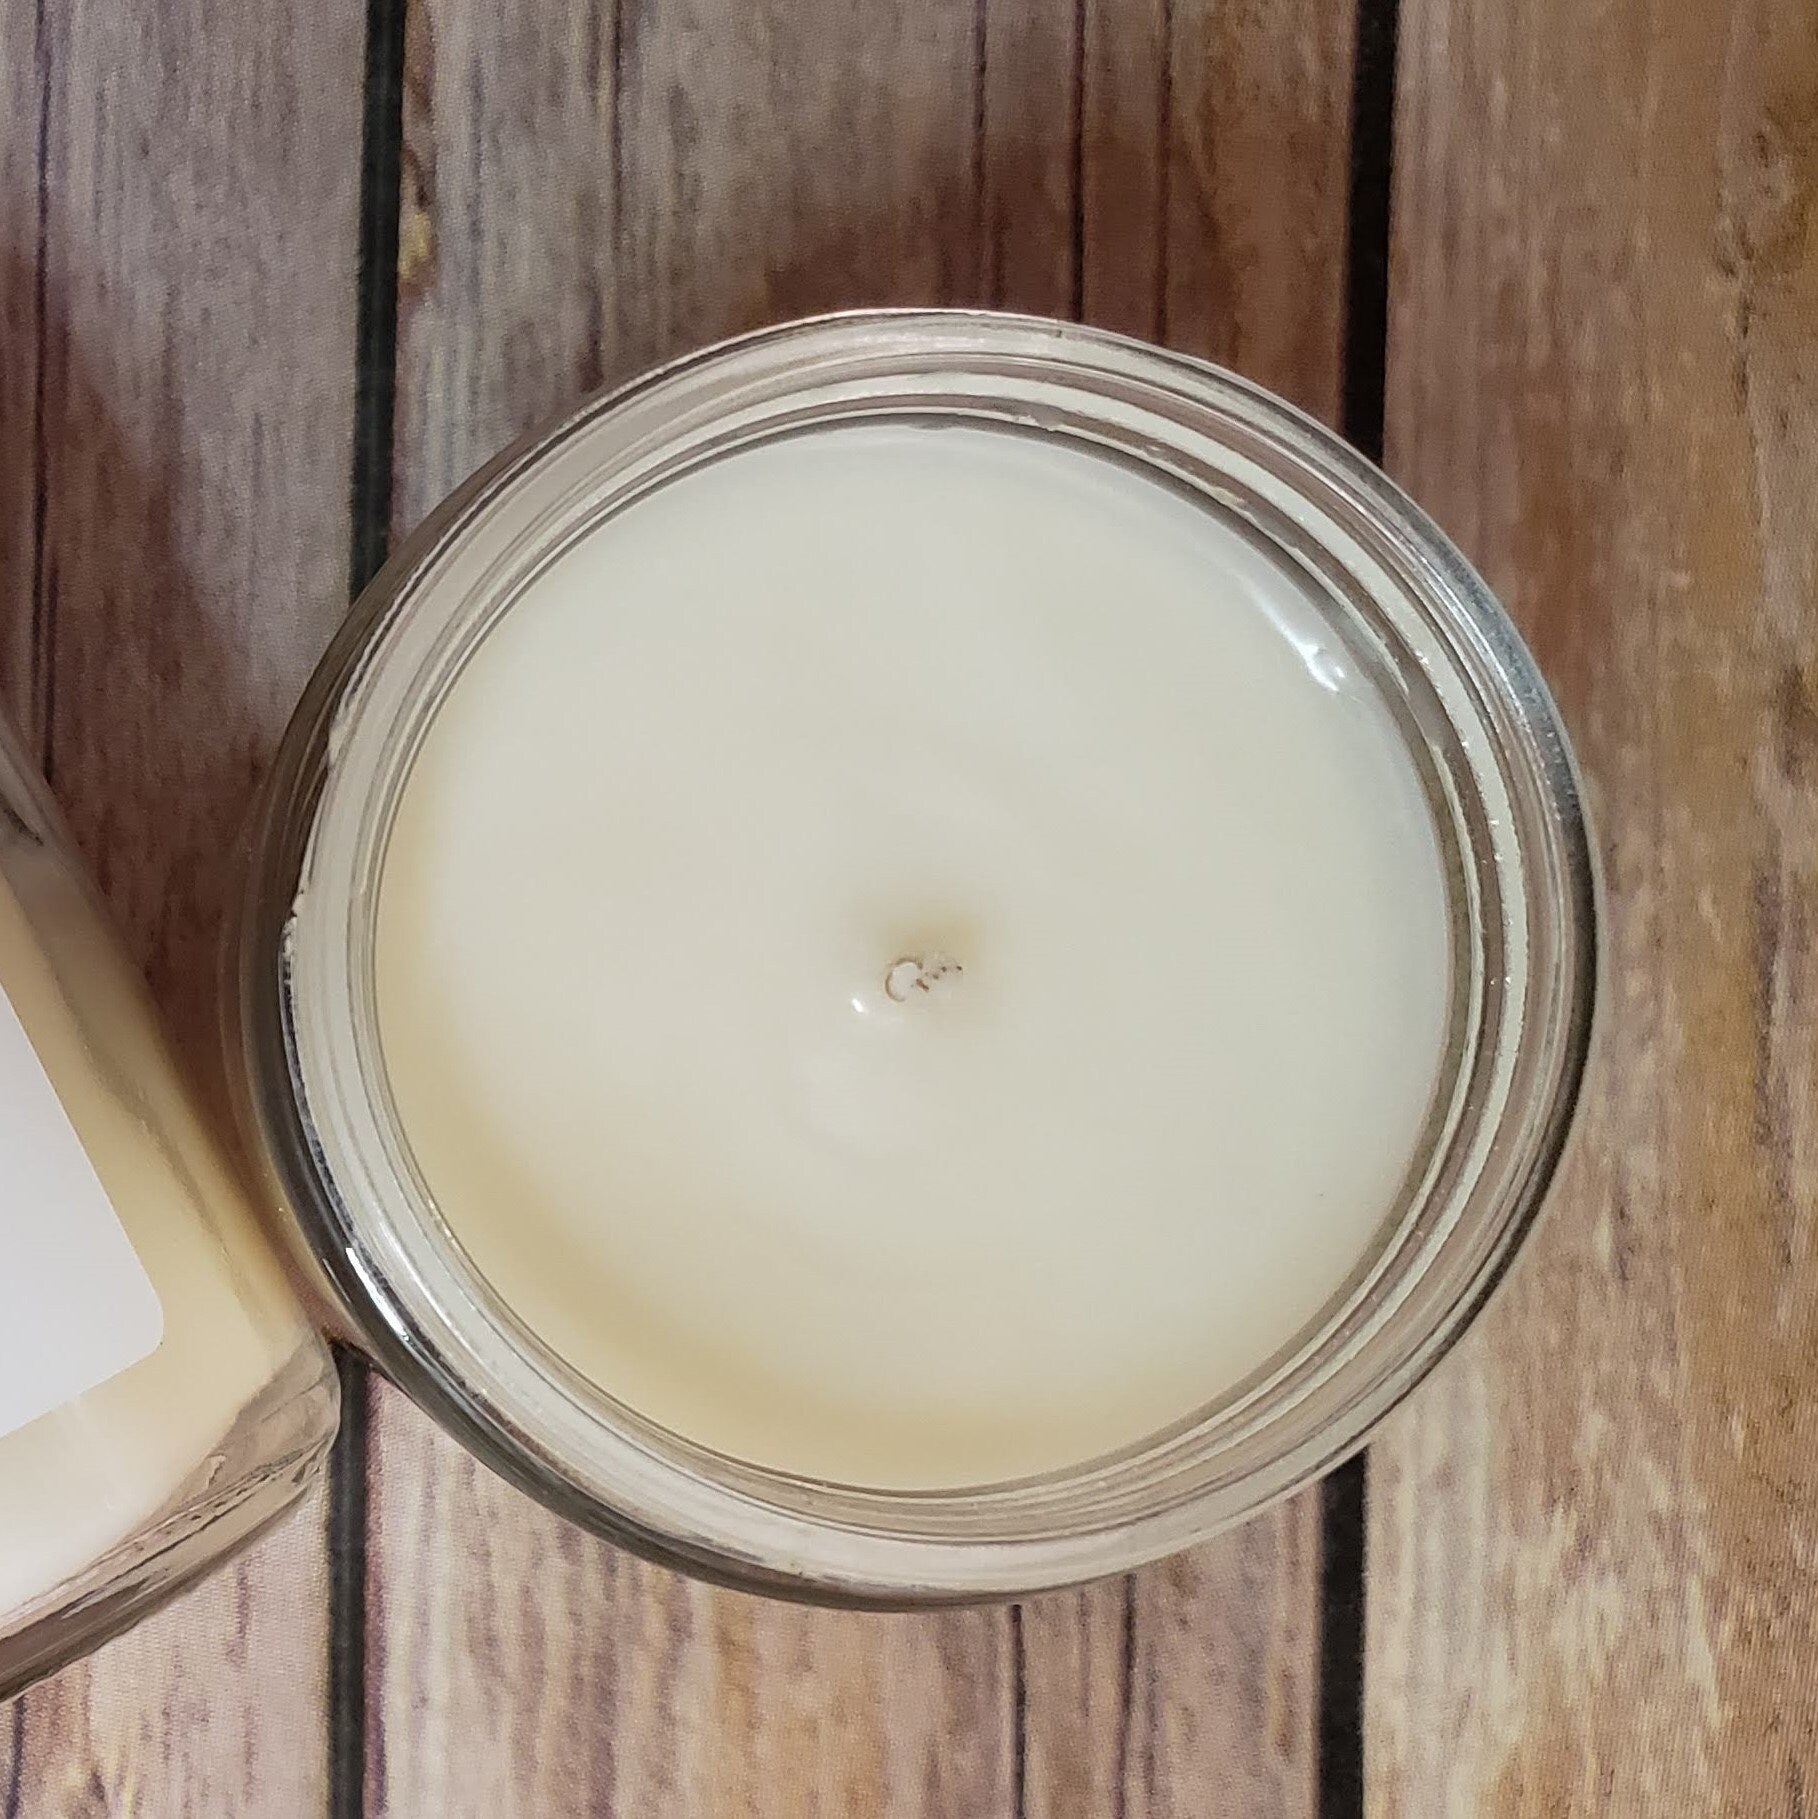 Ivy Creek No 13 | Sea Salt & Orchid Soy Blend Candle | Hand Poured | 7 oz | Cotton Wick | Small Batch | Clean Burning | Container Candle